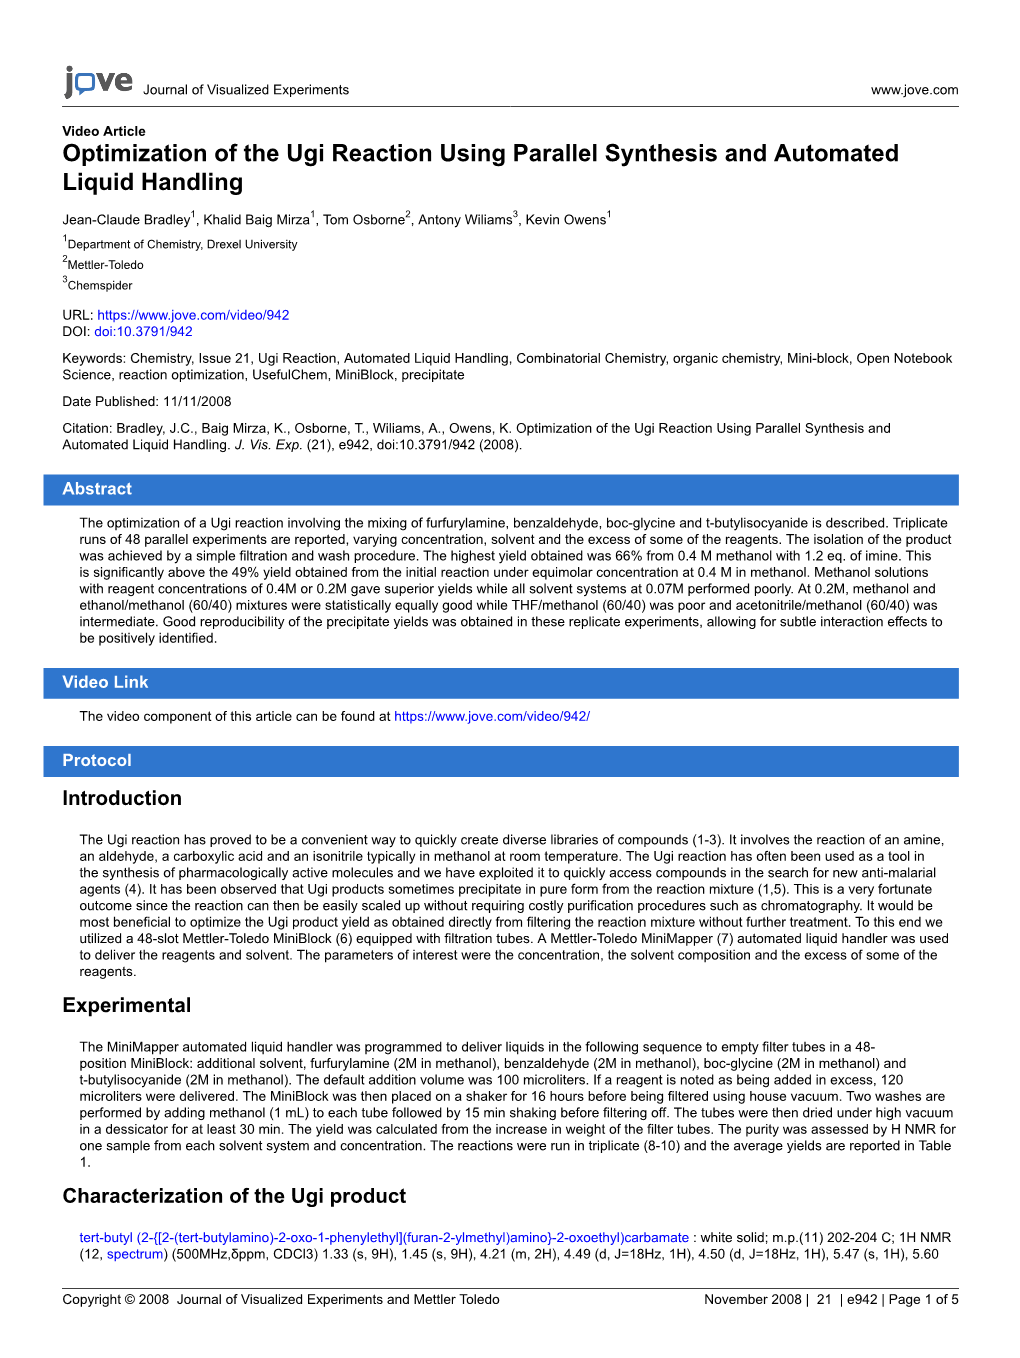 Optimization of the Ugi Reaction Using Parallel Synthesis and Automated Liquid Handling